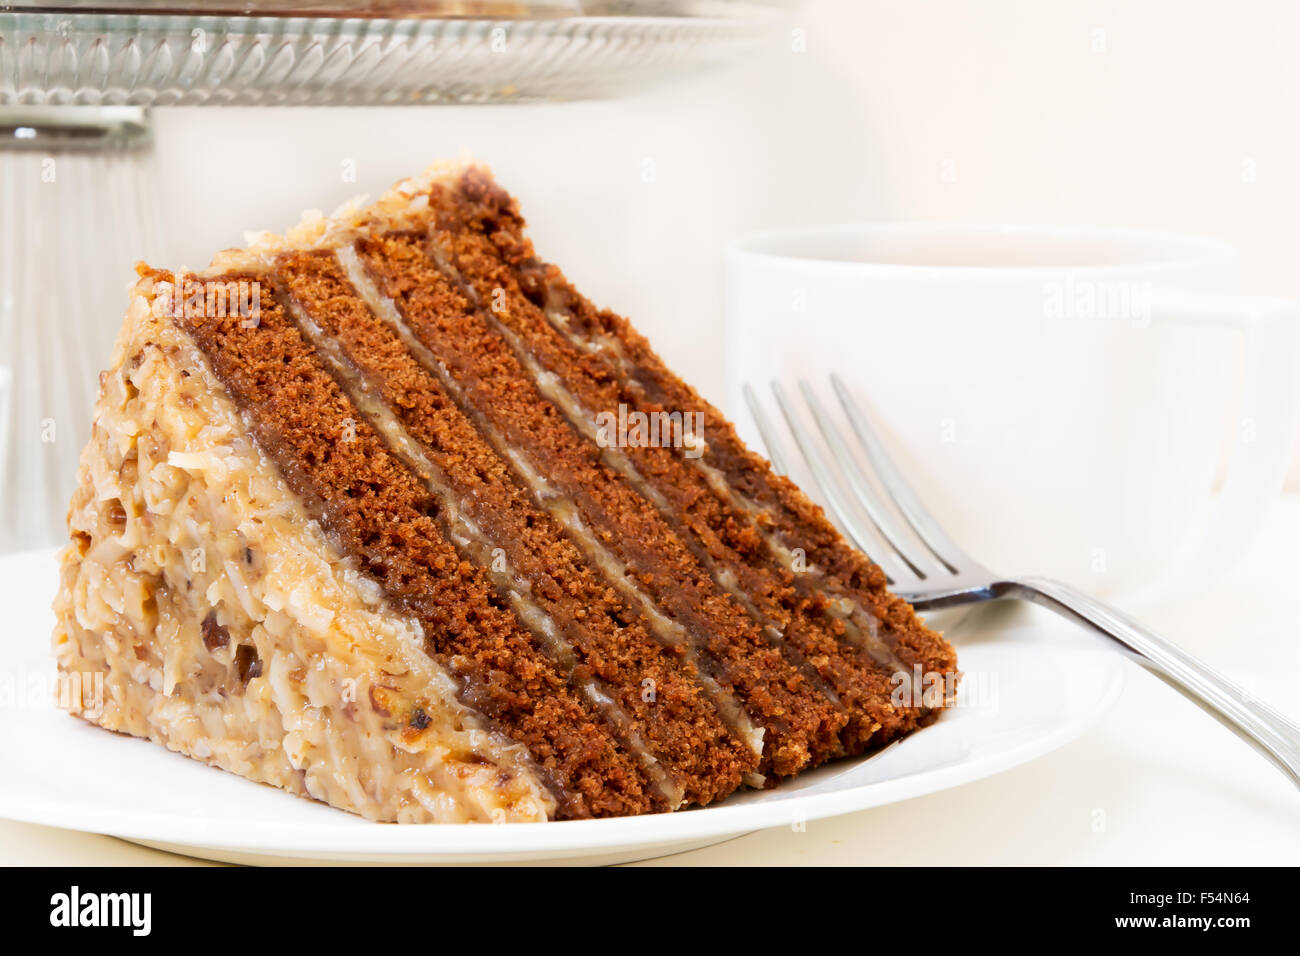 Slice of german chocolate cake closeup with cup of coffee.  Isolated on white background. Stock Photo